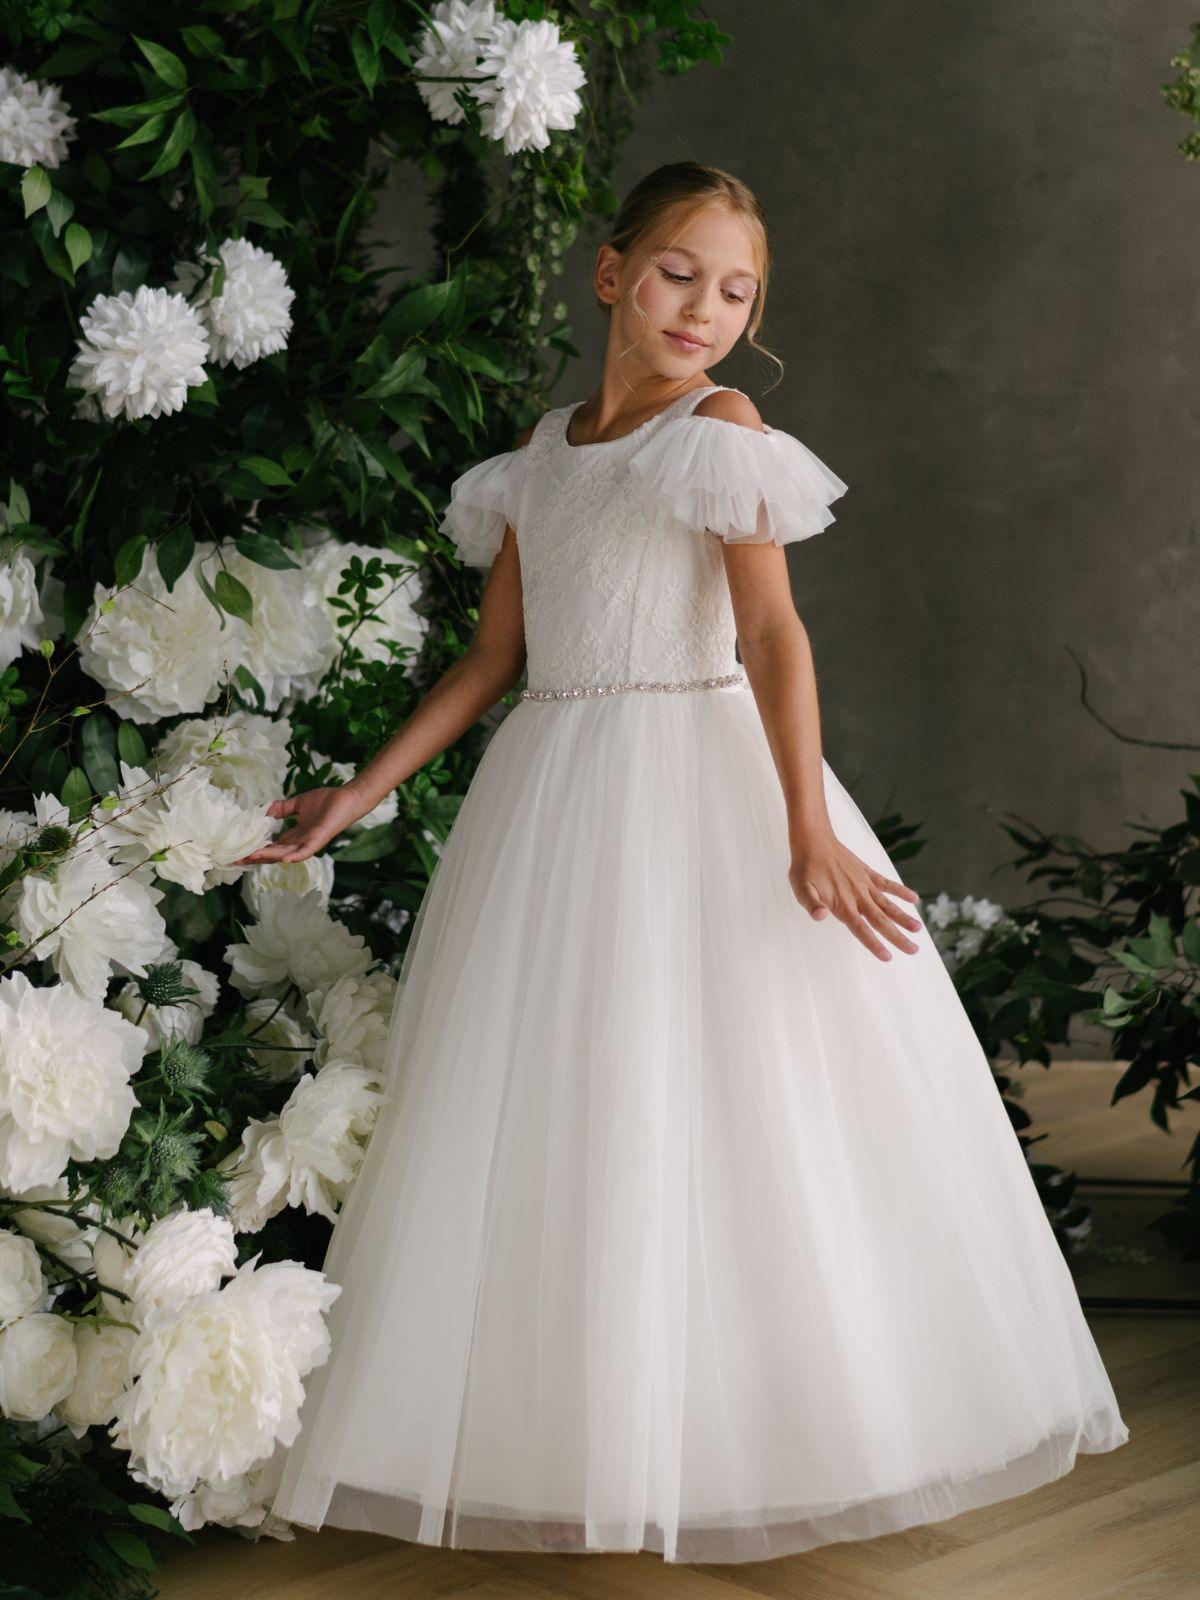 Teter Warm Girl's Communion Off White Lace Tulle Dress Stella (All Sizes)